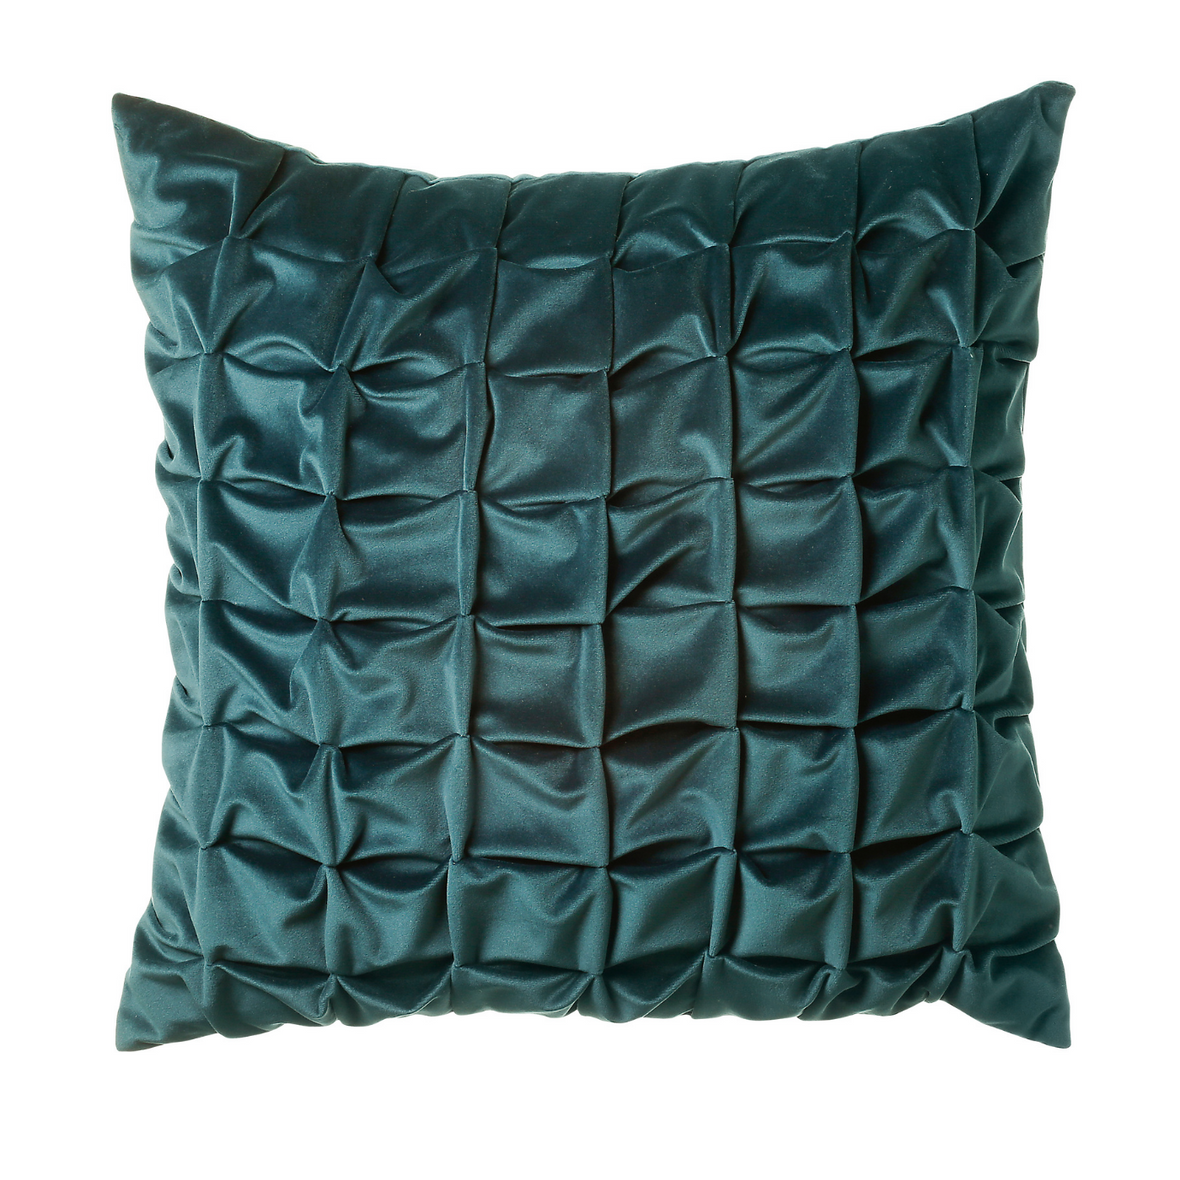 Scatterbox Origami Teal Cushion